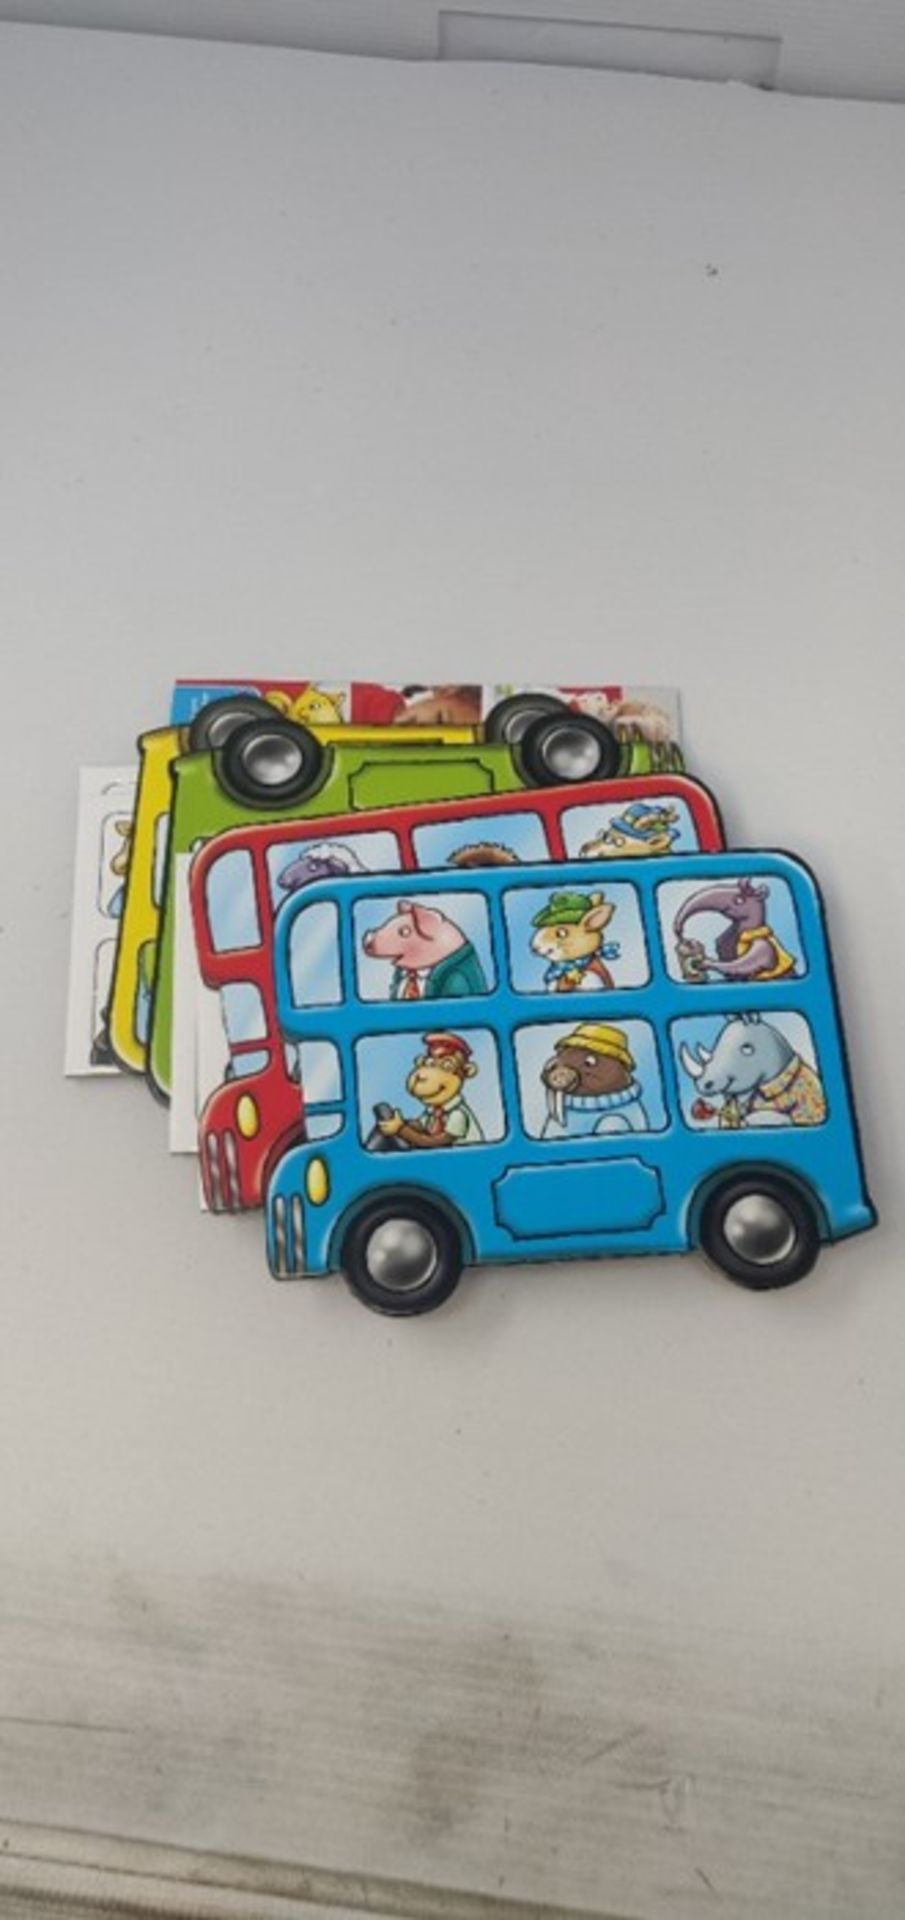 Orchard Toys Little Bus Lotto Mini Game - Image 3 of 3